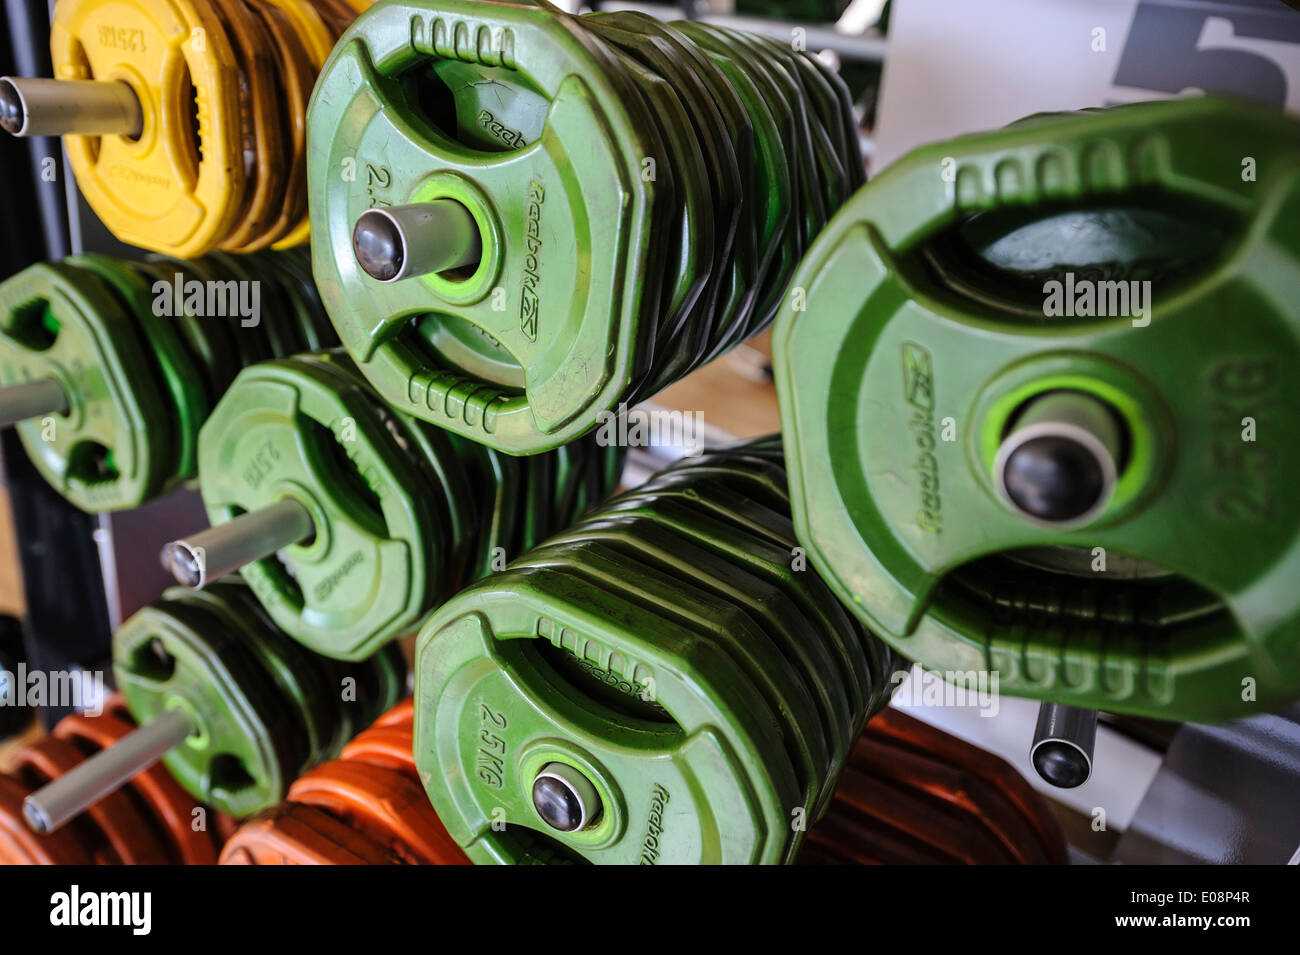 Colorful Reebok rubber coated weight plates at gym Stock Photo - Alamy